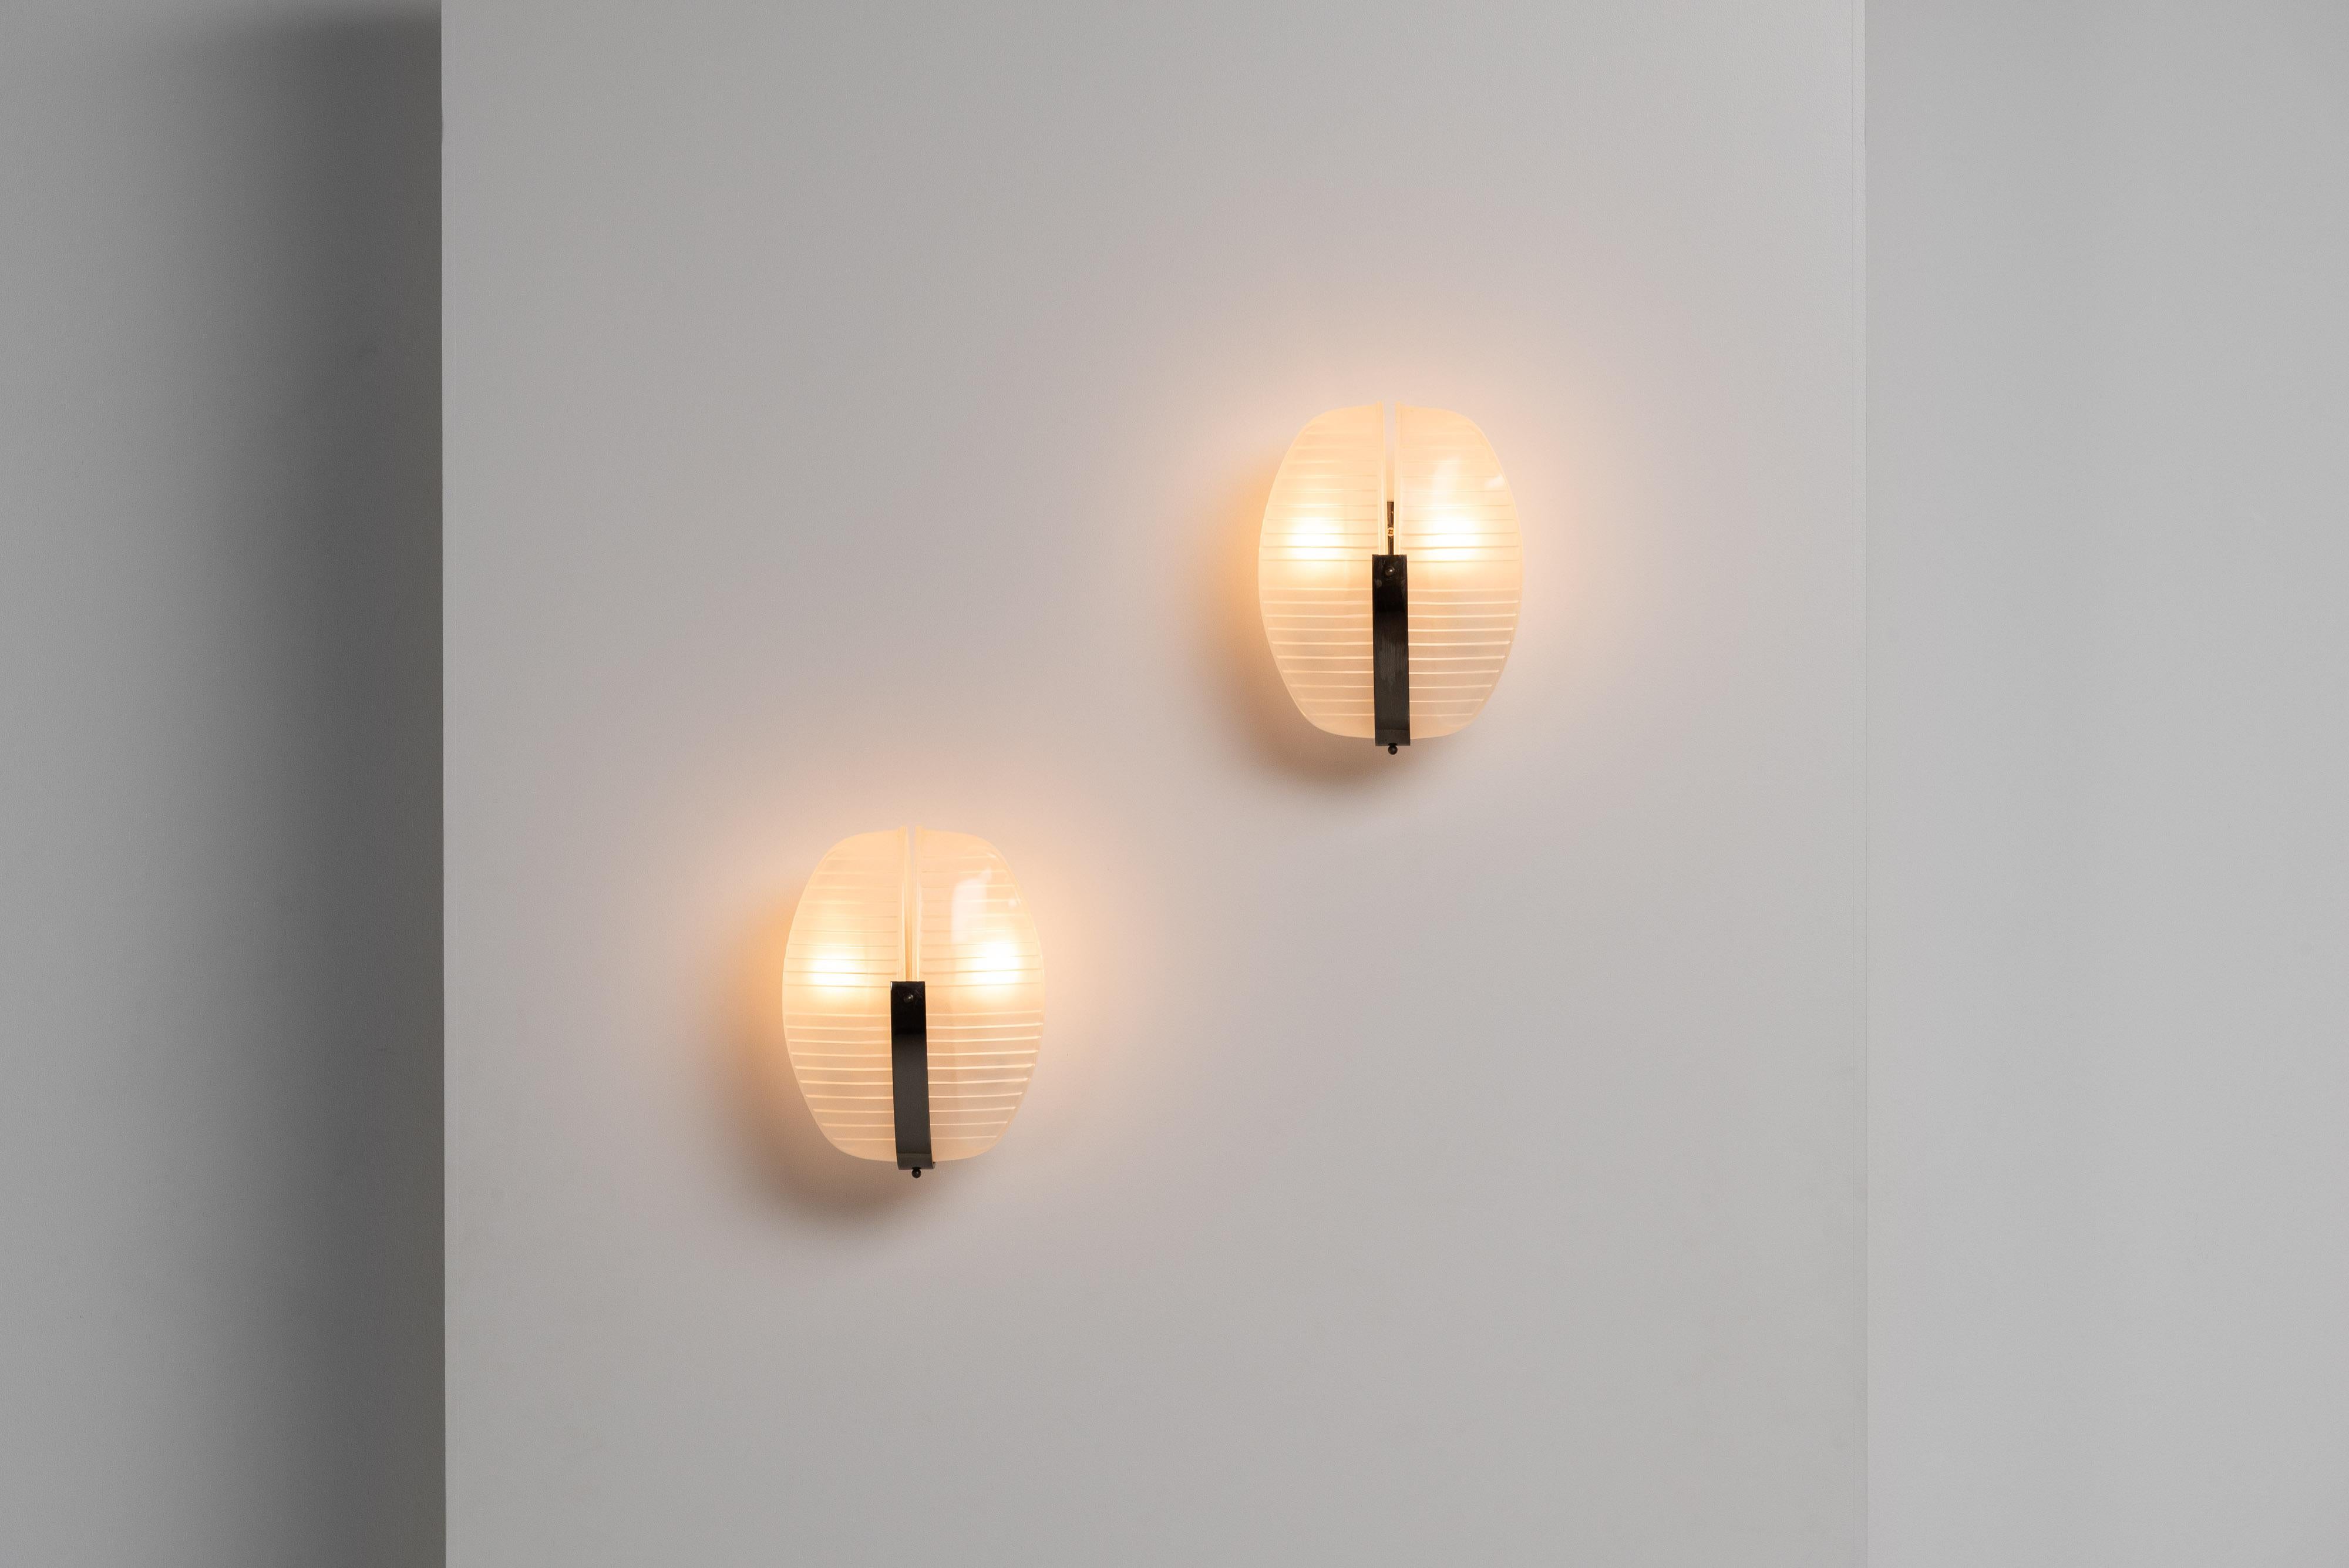 Wonderful Lambda wall sconces designed by Vico Magistretti and manufactured by Artemide in Italy in 1961. When these lamps are turned on, they have a charming industrial look, thanks to the ribbed glass shades with frosted insides. They are